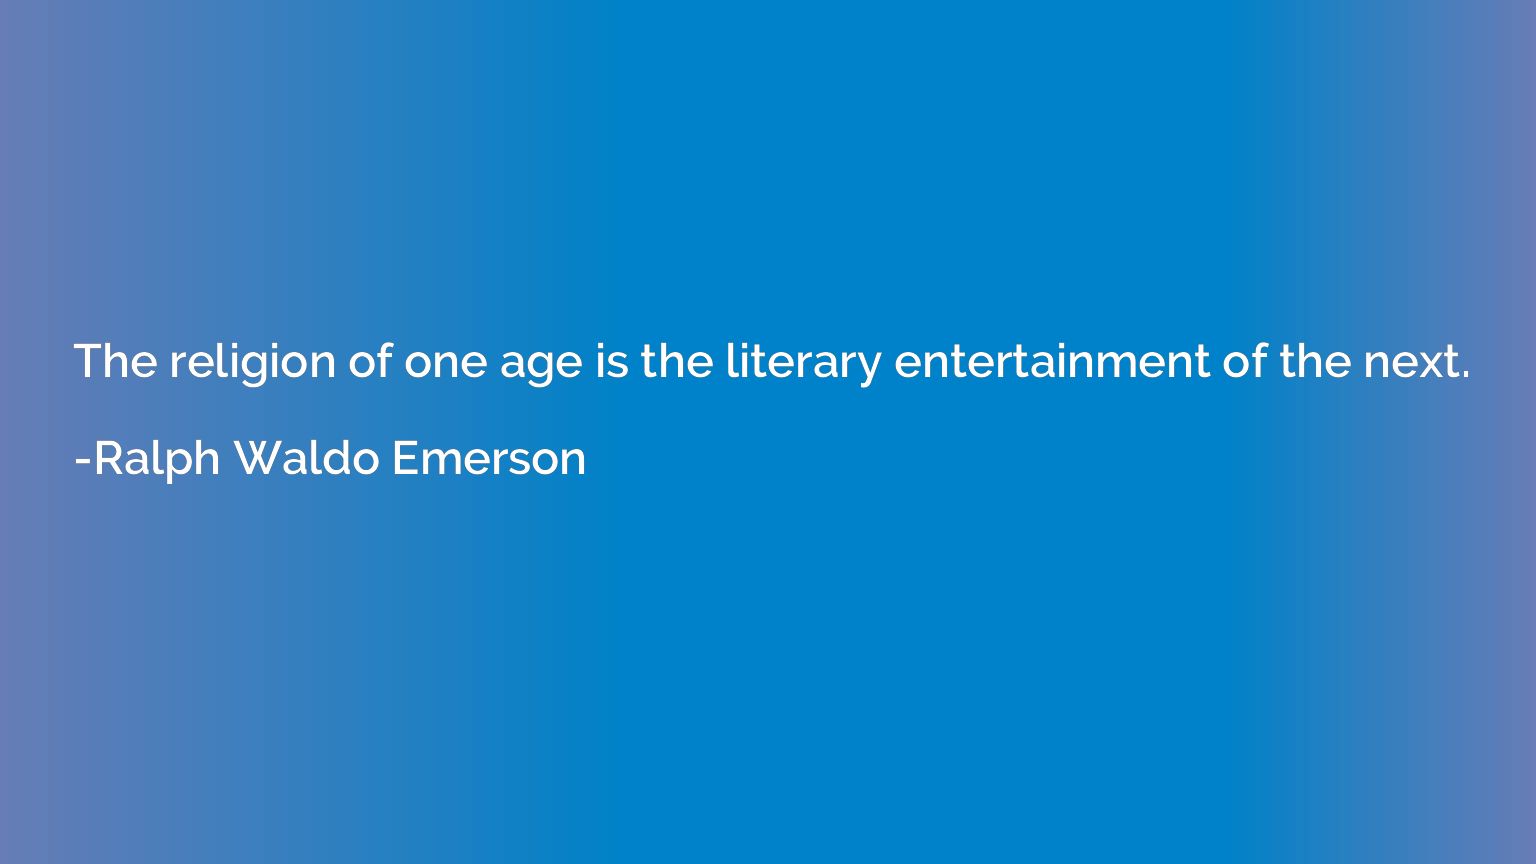 The religion of one age is the literary entertainment of the